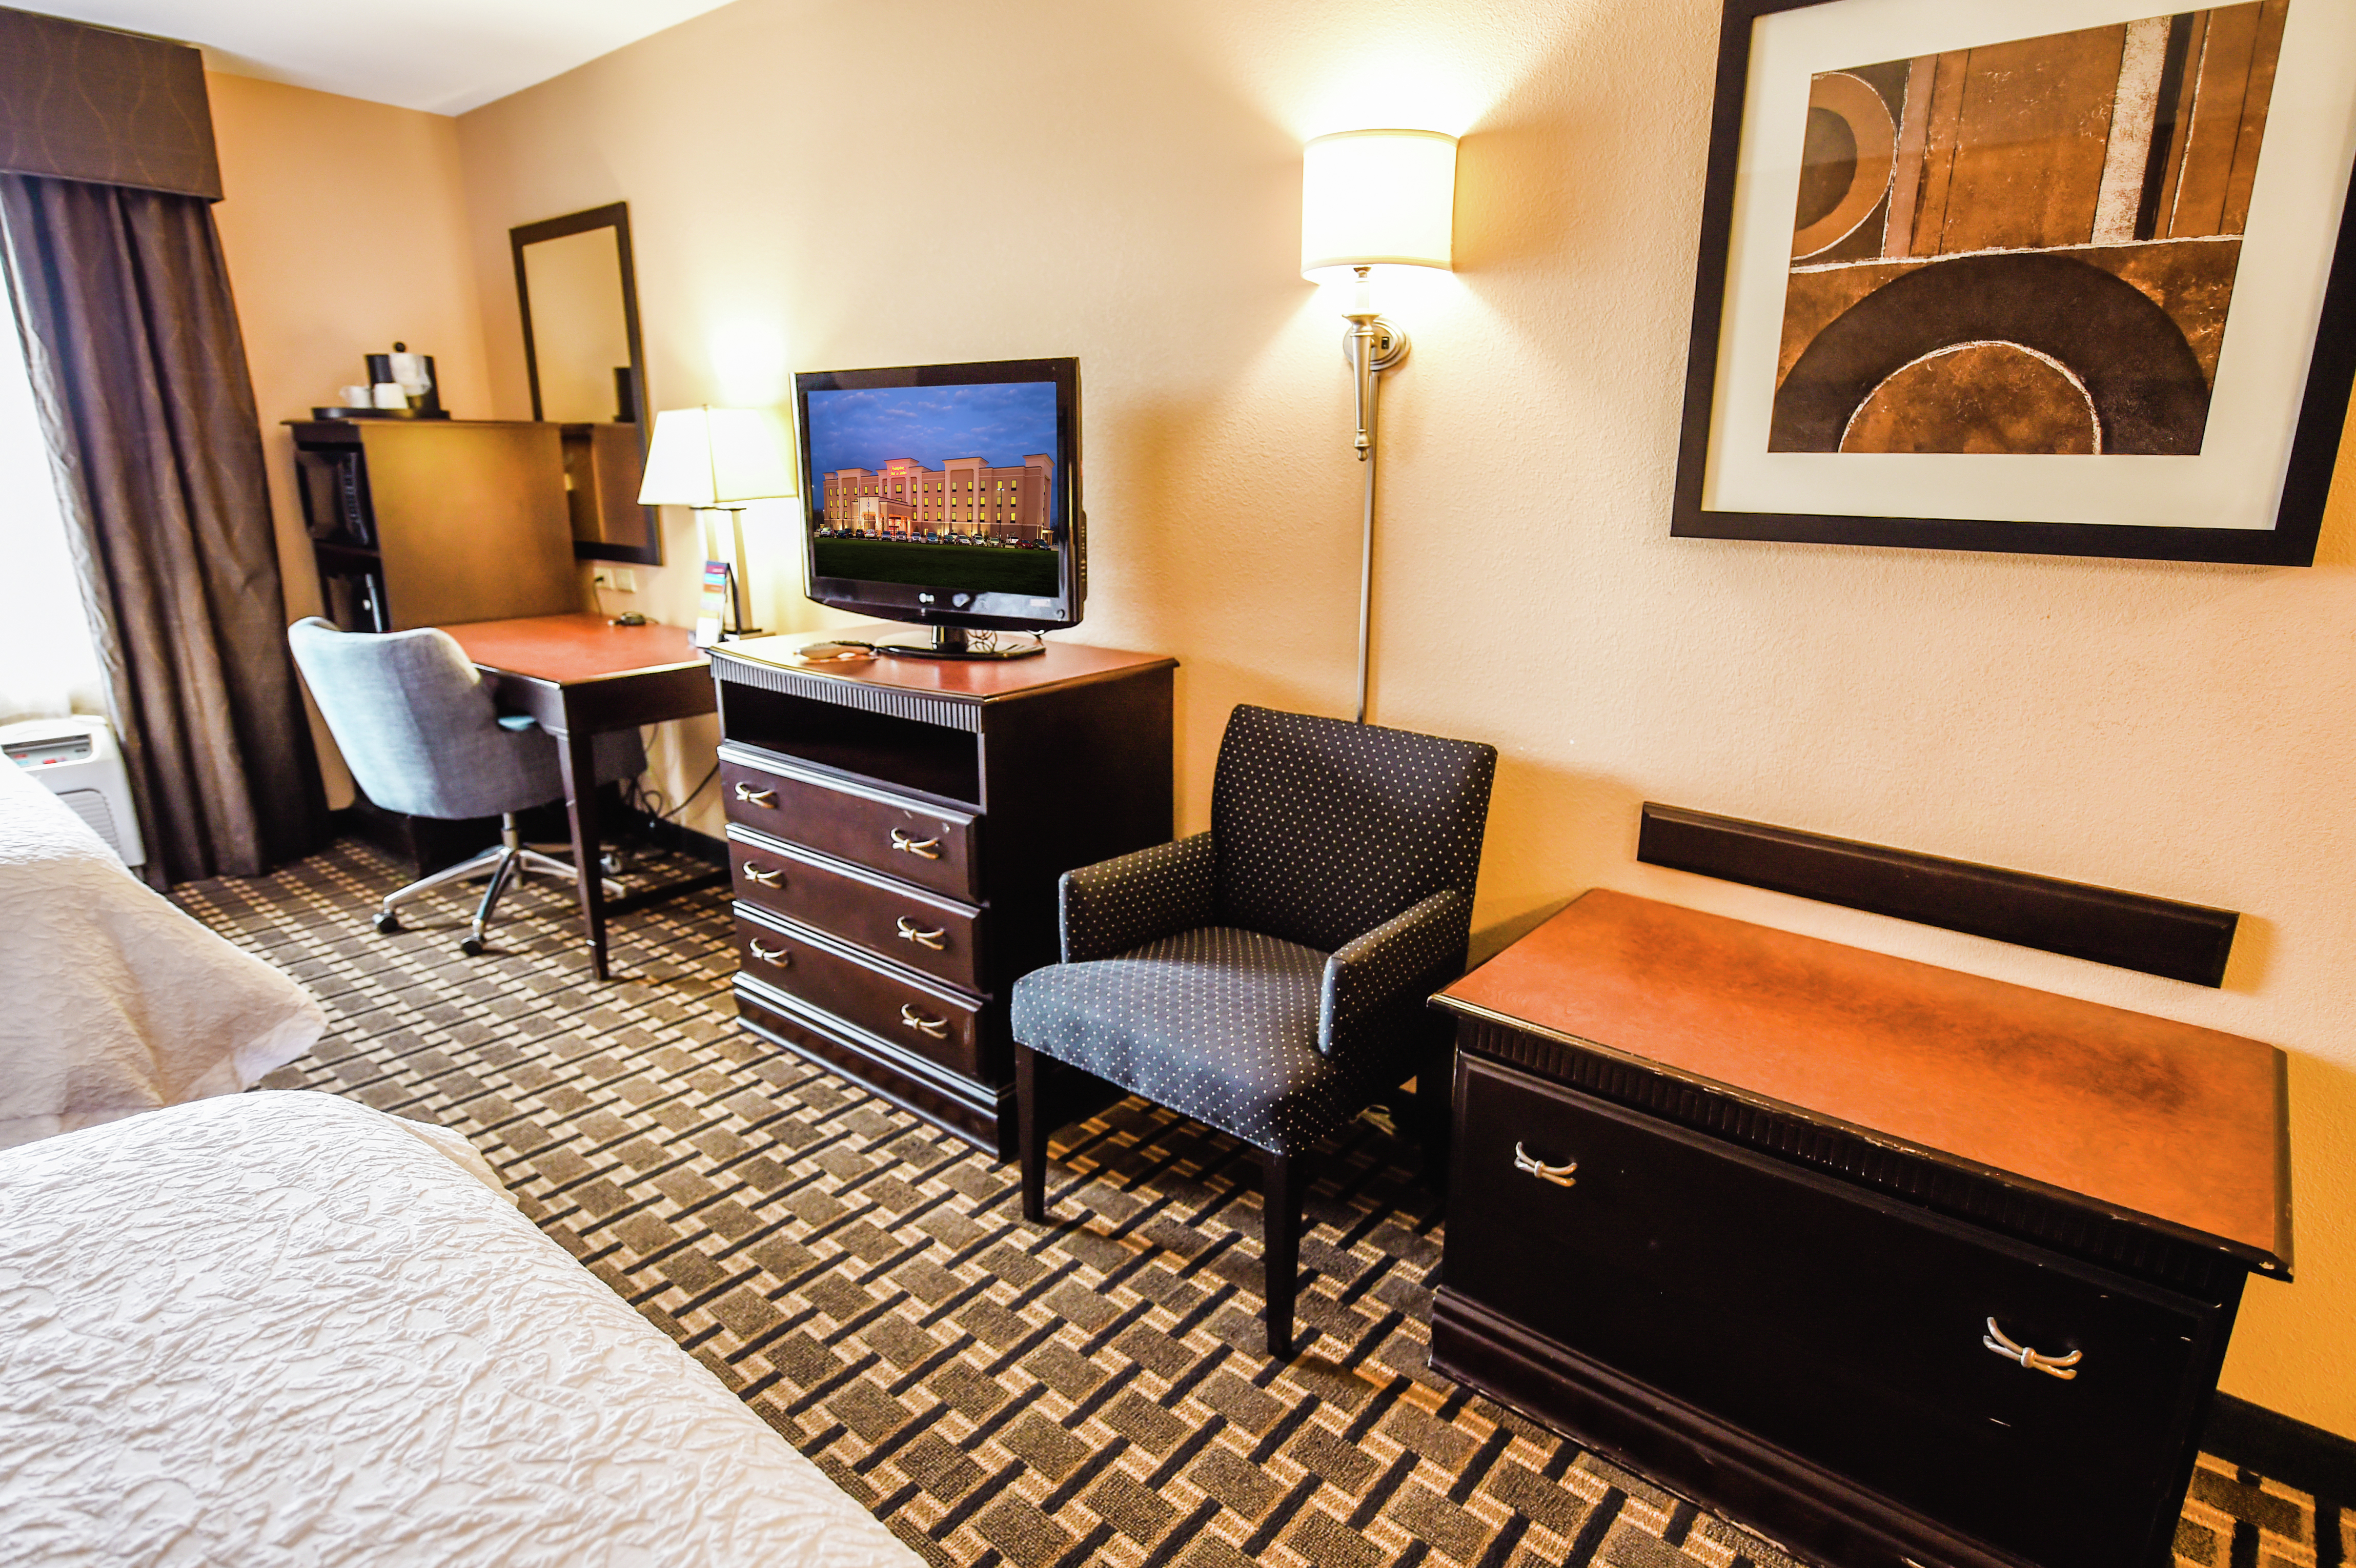 Guest Room Amenities such as TV and Desk Area